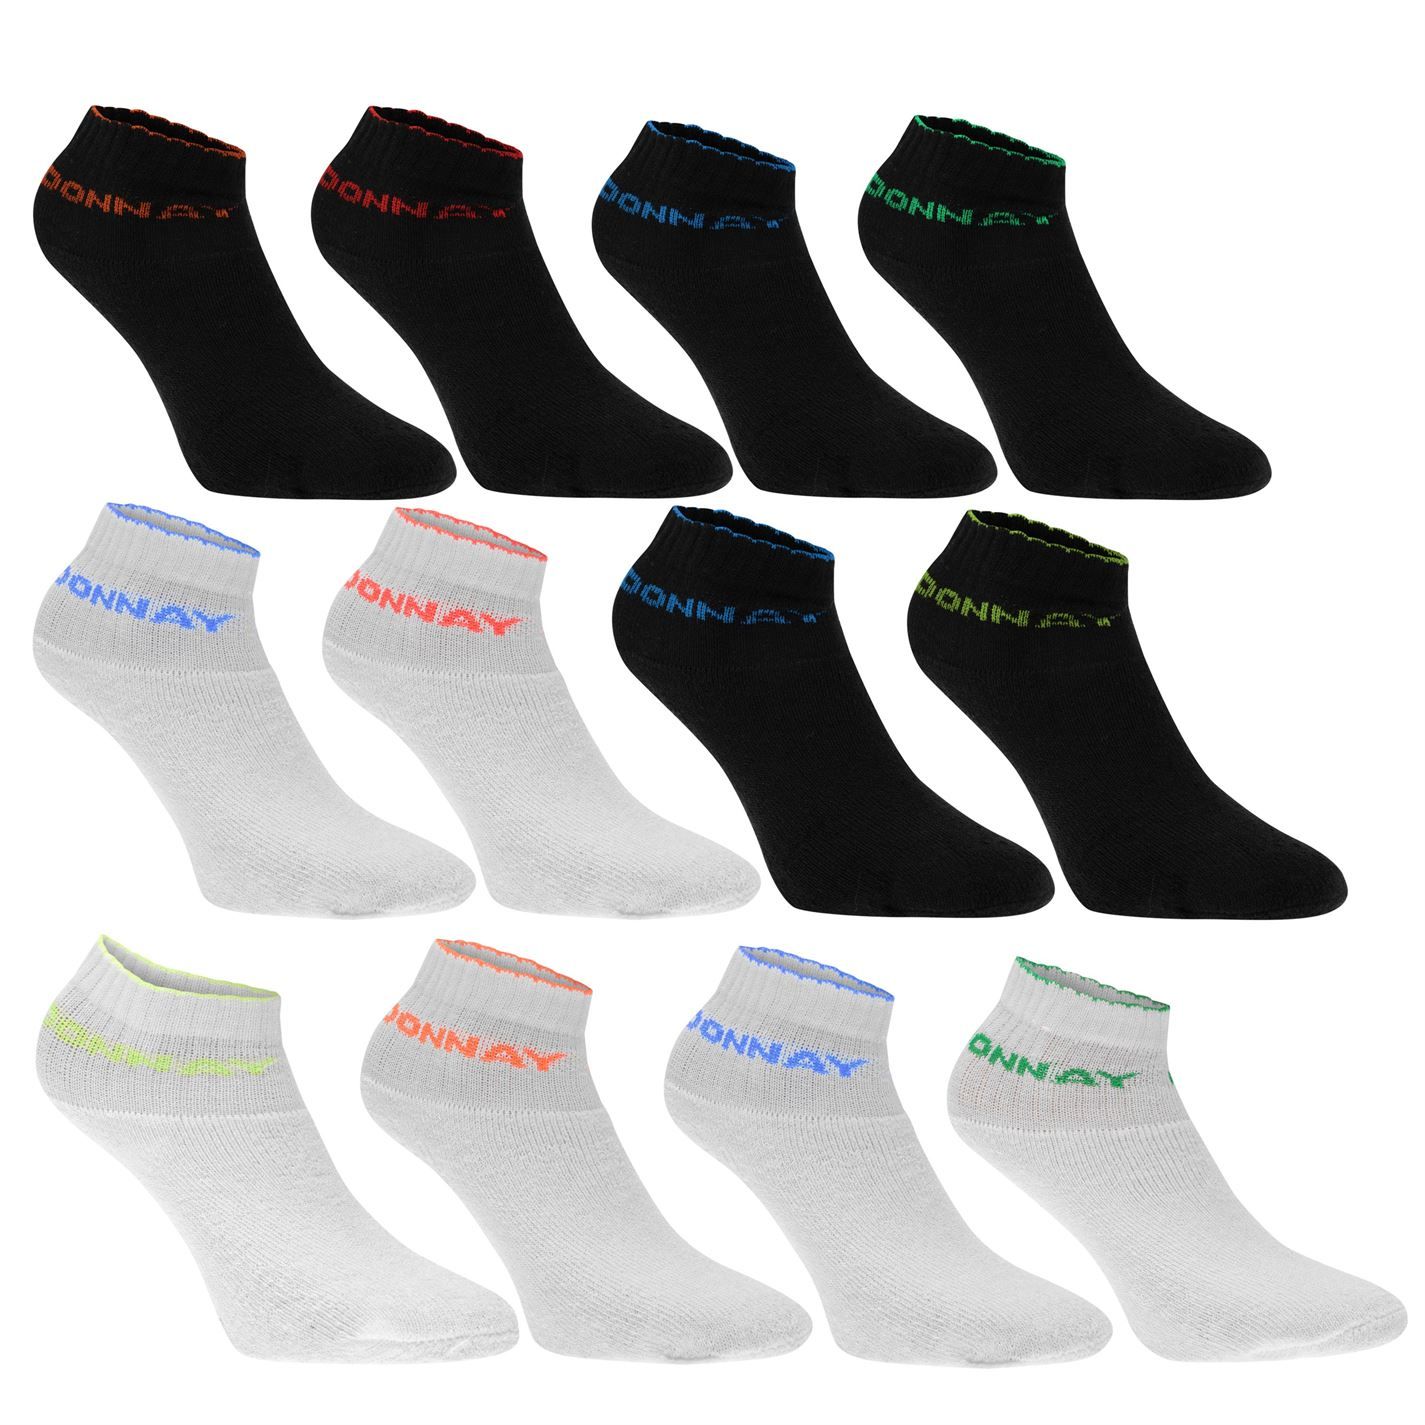 <strong>Donnay Quarter Socks 12 Pack Childrens</strong><br><br> These Donnay Quarter 12 Pack Socks, feature a ribbed design to the ankle for a secure fit. <br>> Socks<br>> 12 pack<br>> Ribbed ankle<br>> Donnay branding<br>> 65% cotton 25% polyester 10% other fibres